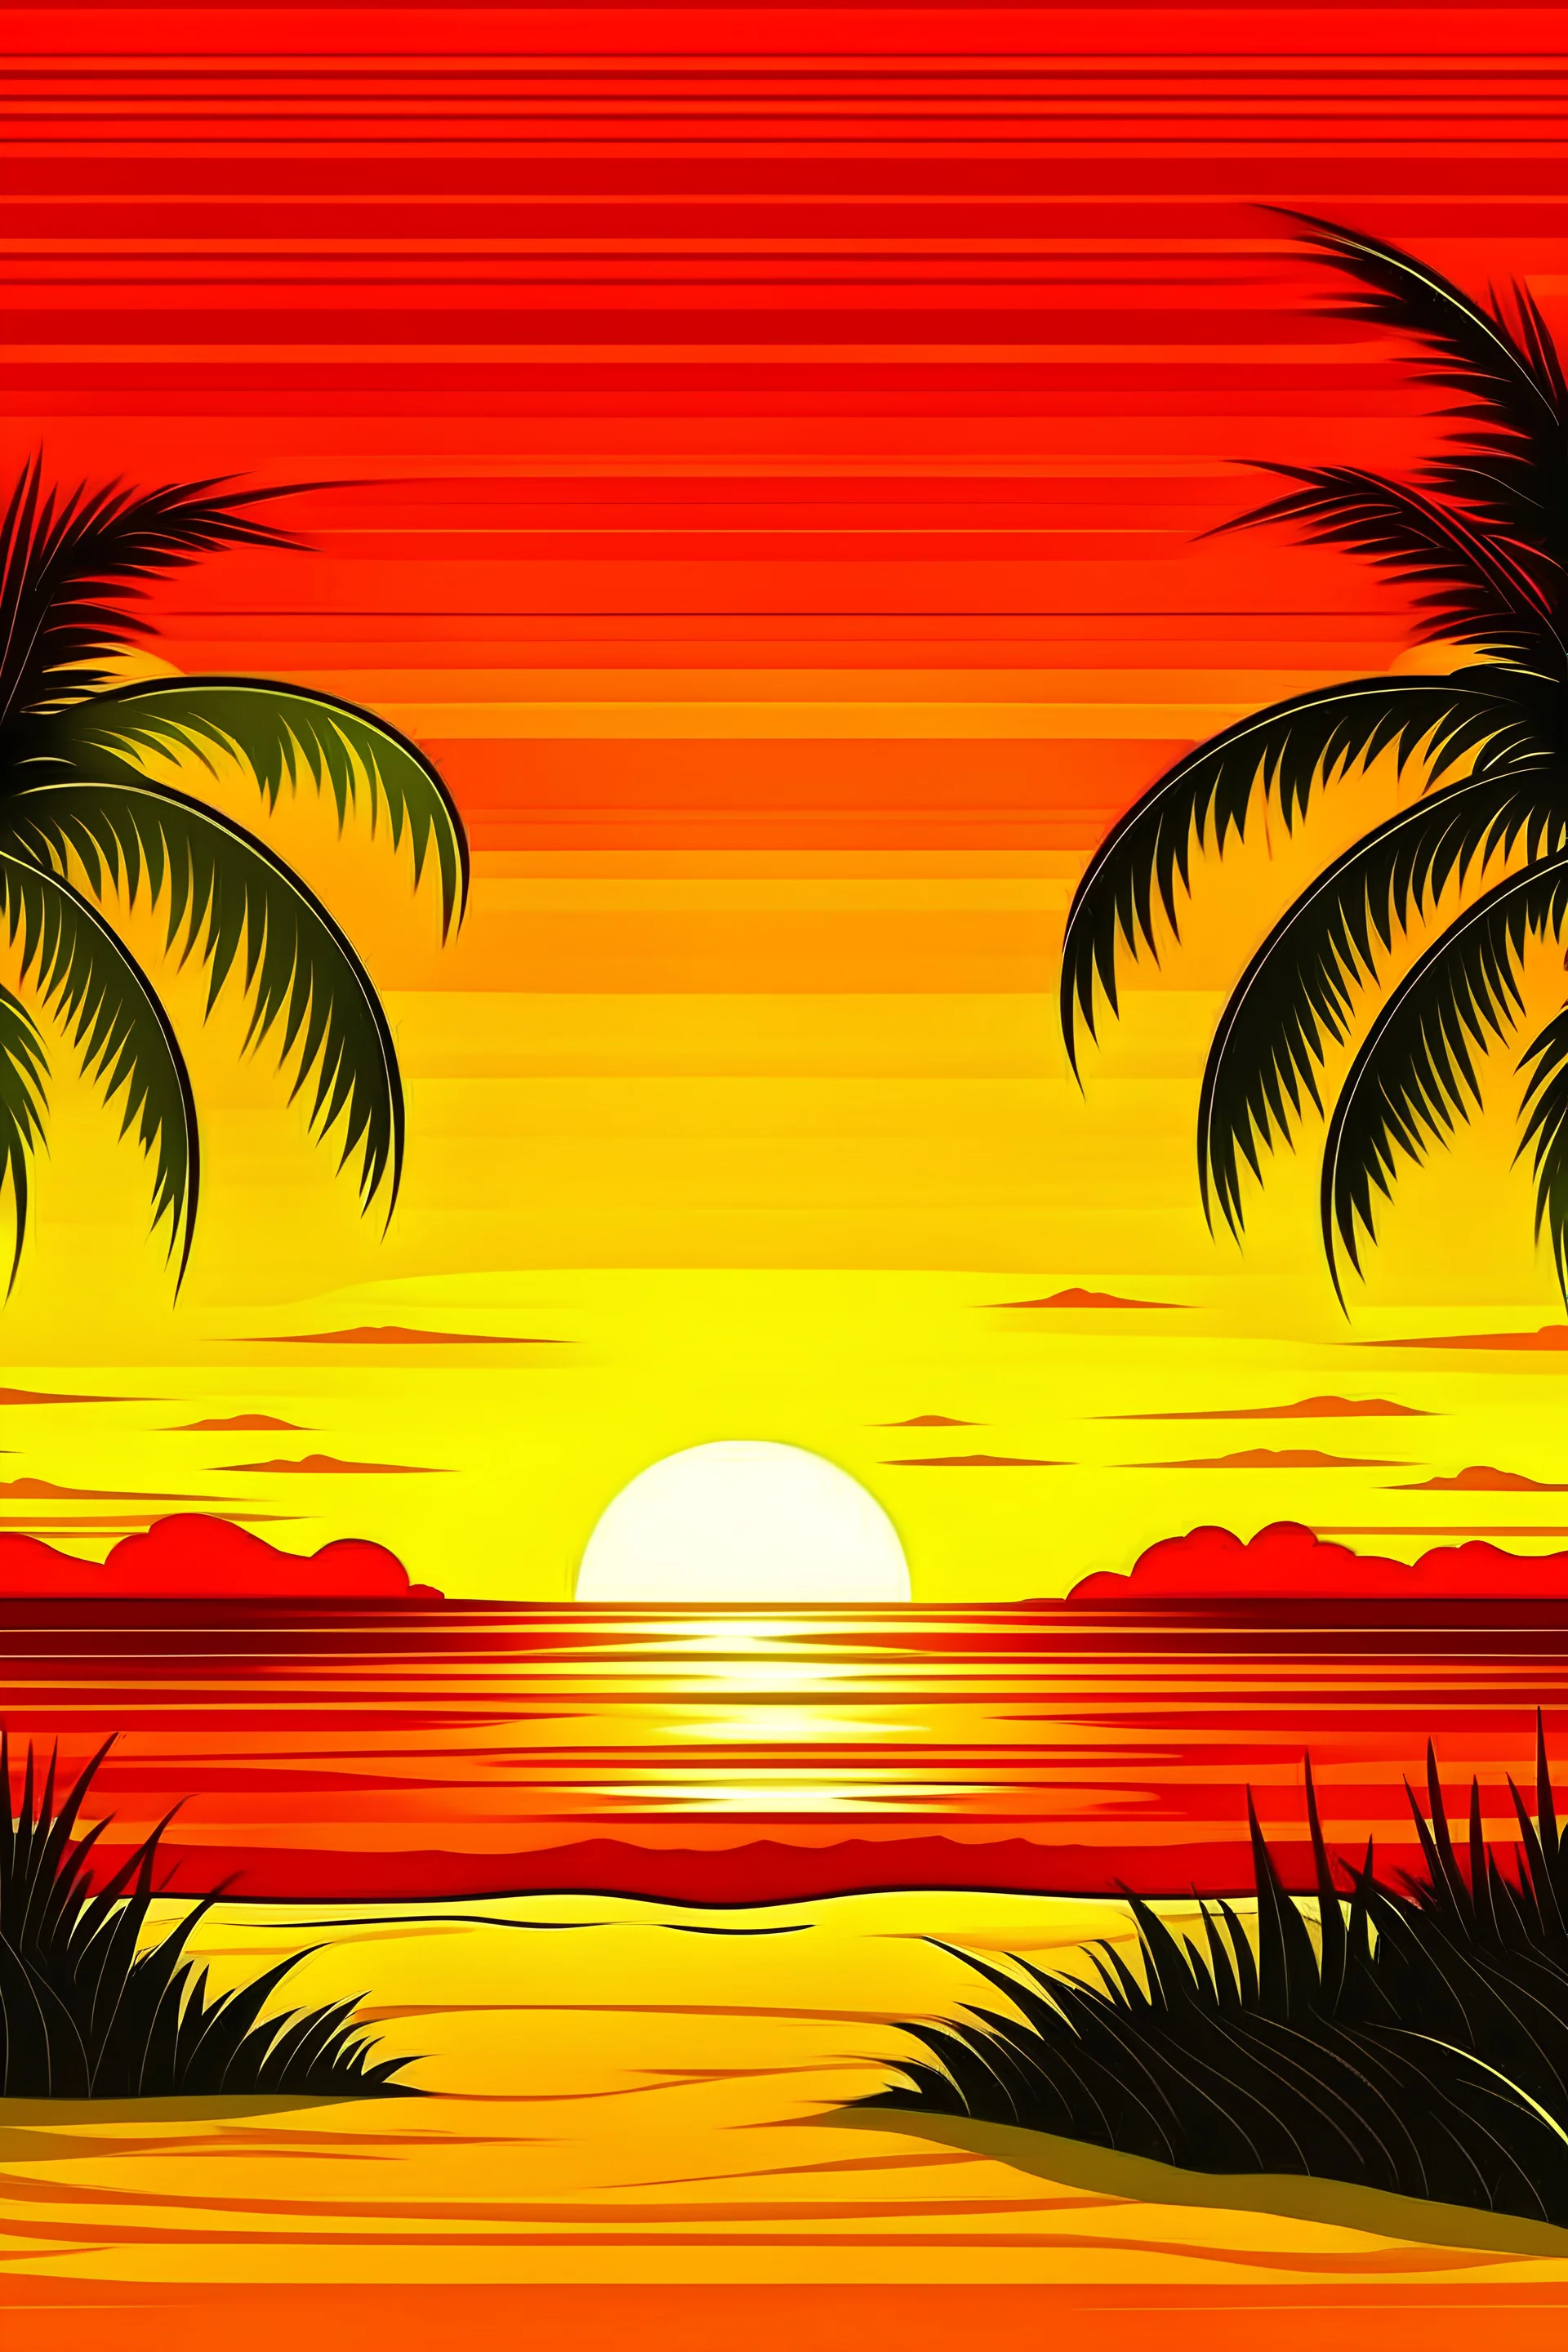 sunset at the beach with palm trees with background red blue and yellow